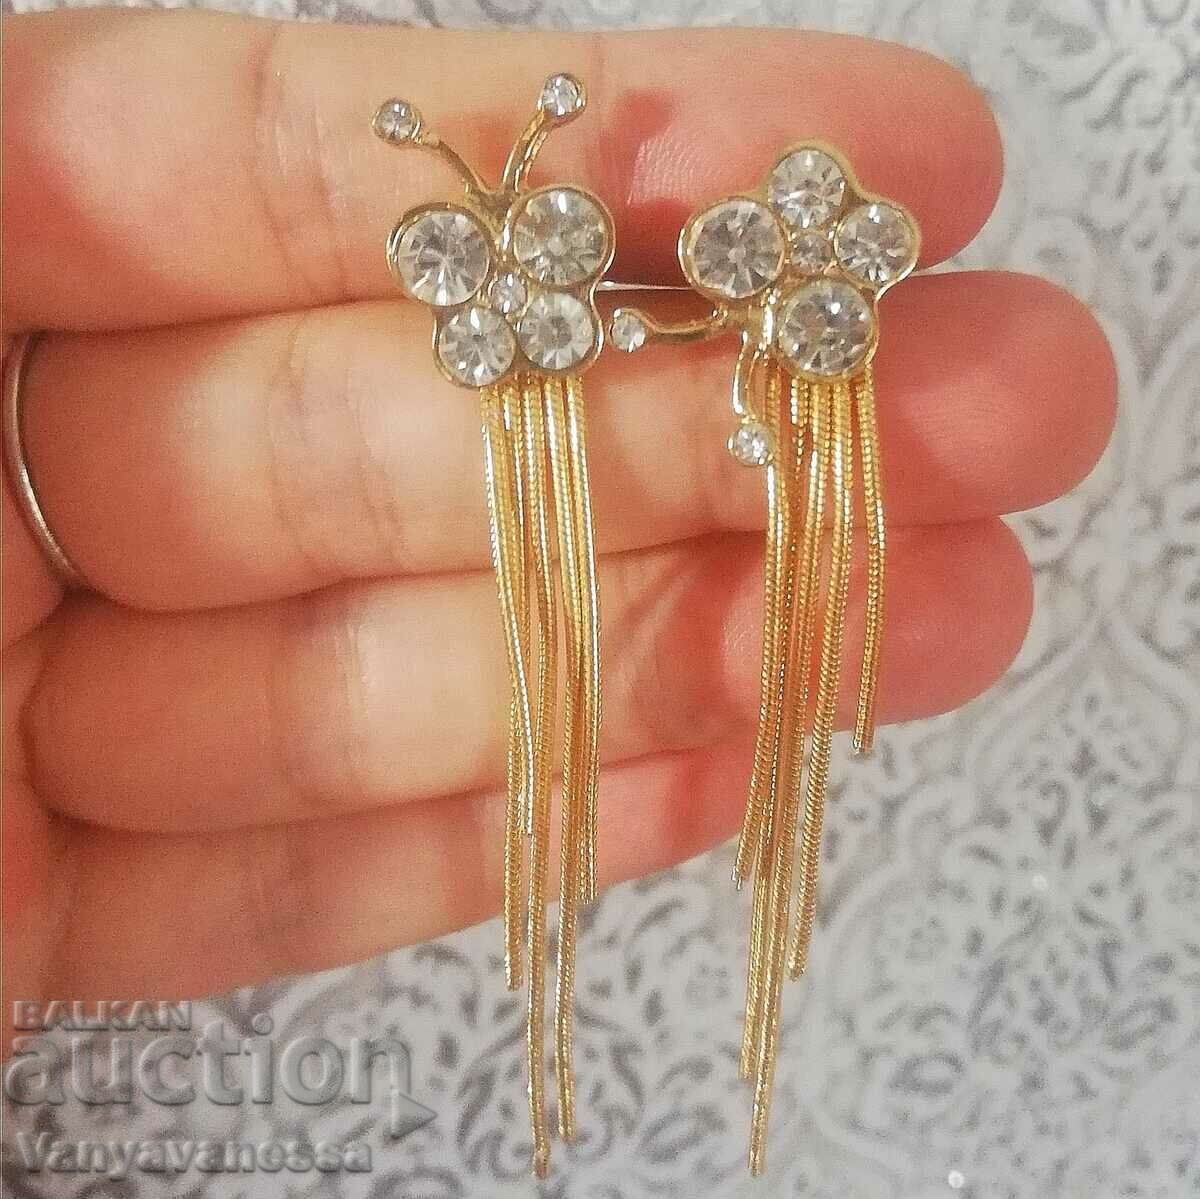 Butterfly dangle earrings with white crystals on a screw